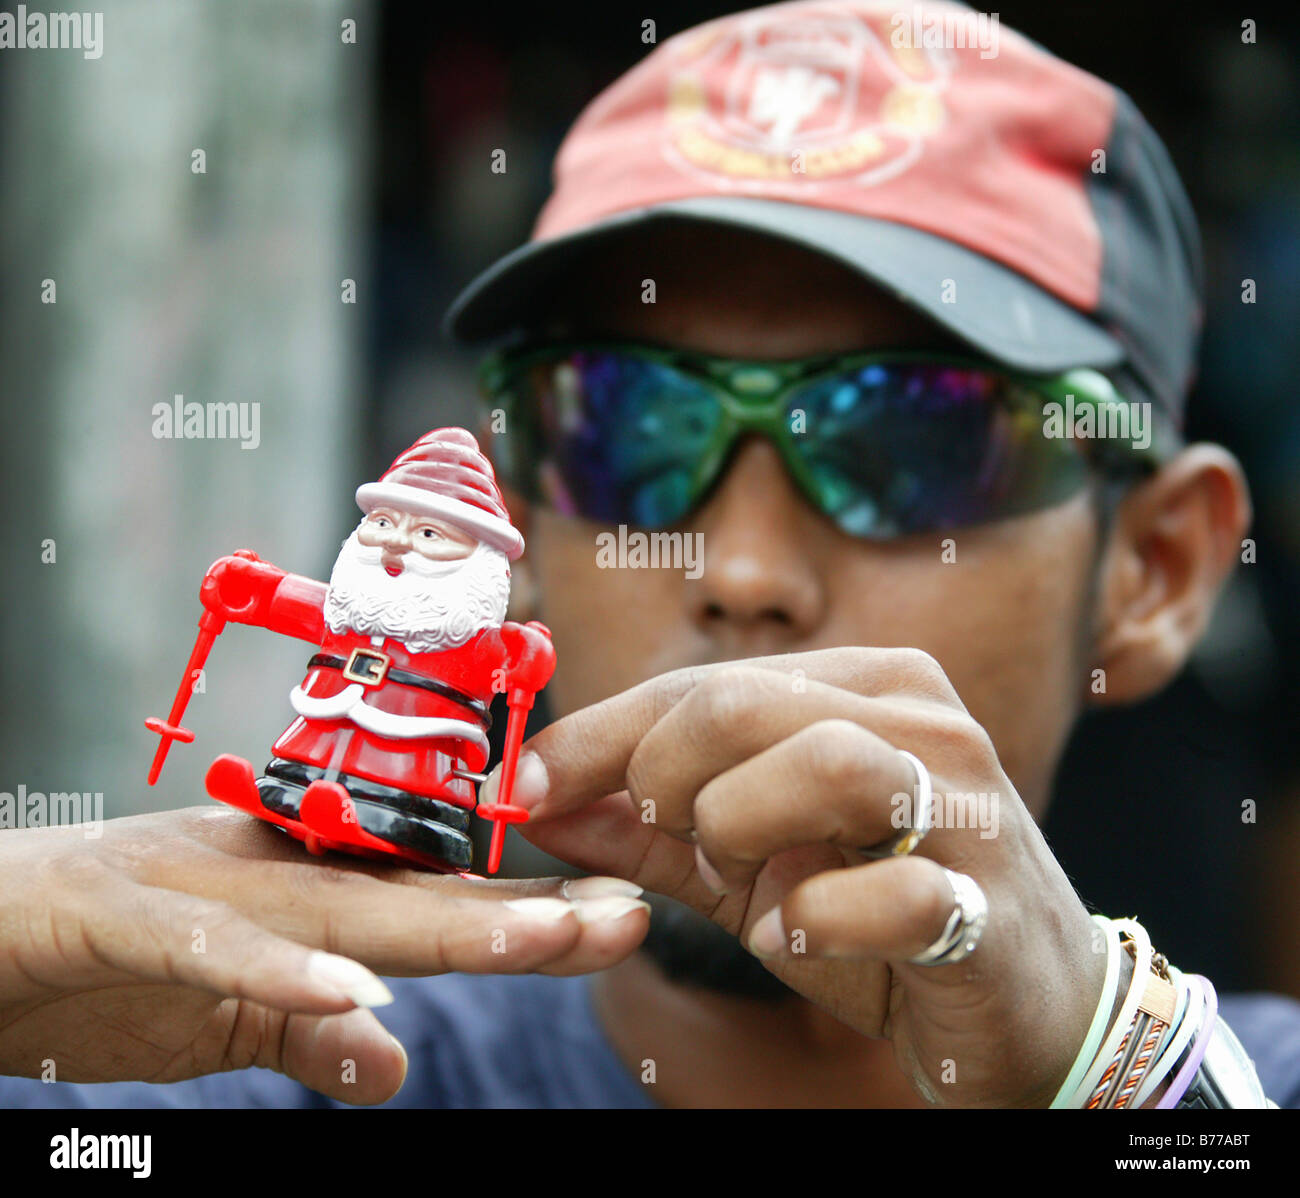 Street hawker with Santa figurine on skis, Port Louis, Mauritius, Indian Ocean, Africa Stock Photo